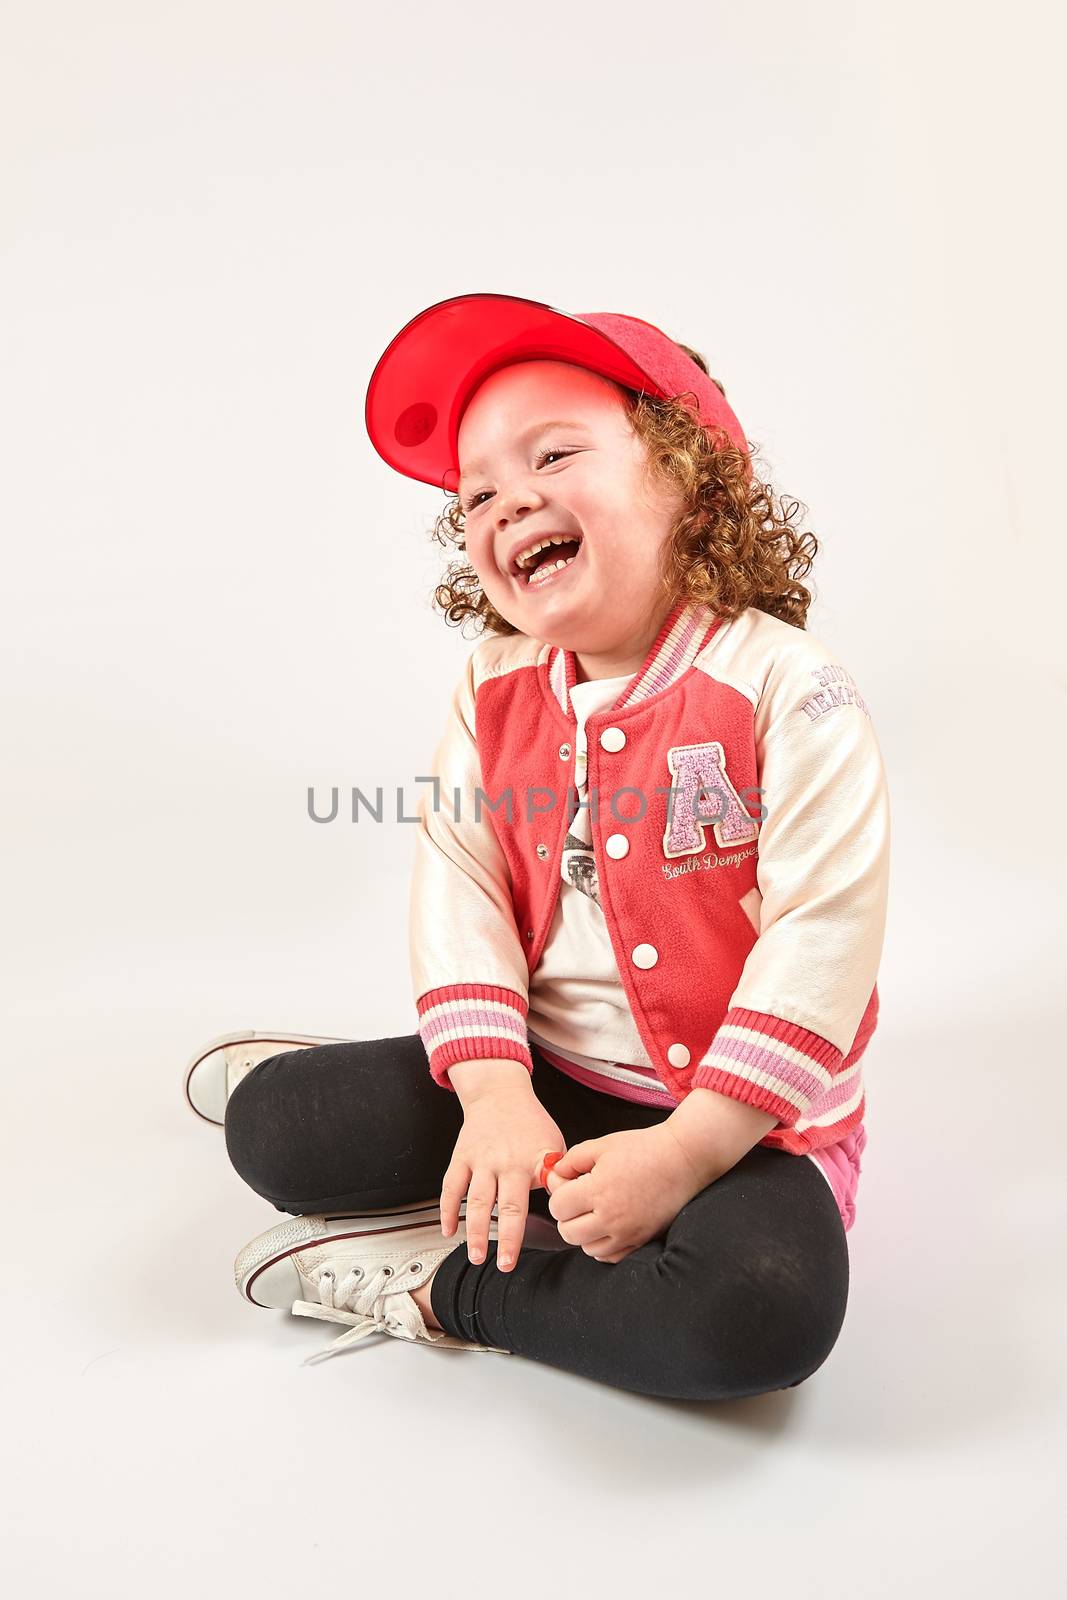 Little Girl Fashion Model With Red Cap by Multipedia